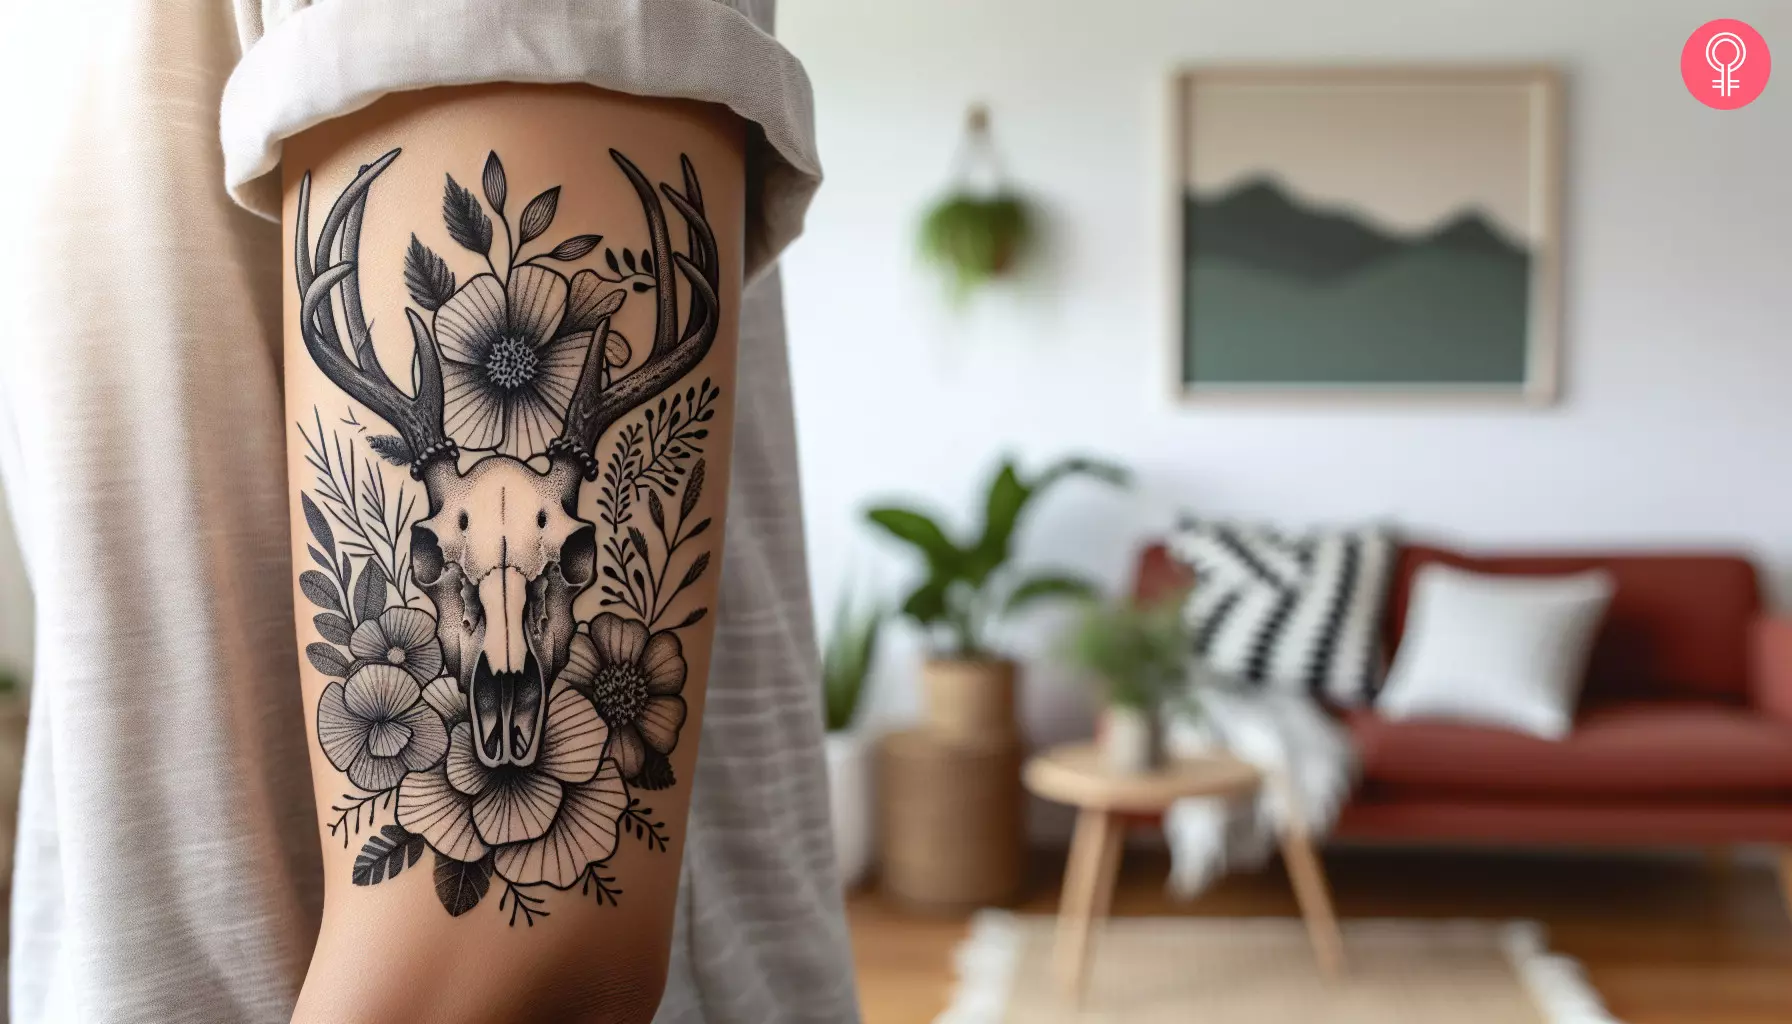 A deer skull with flowers tattoo on the upper arm